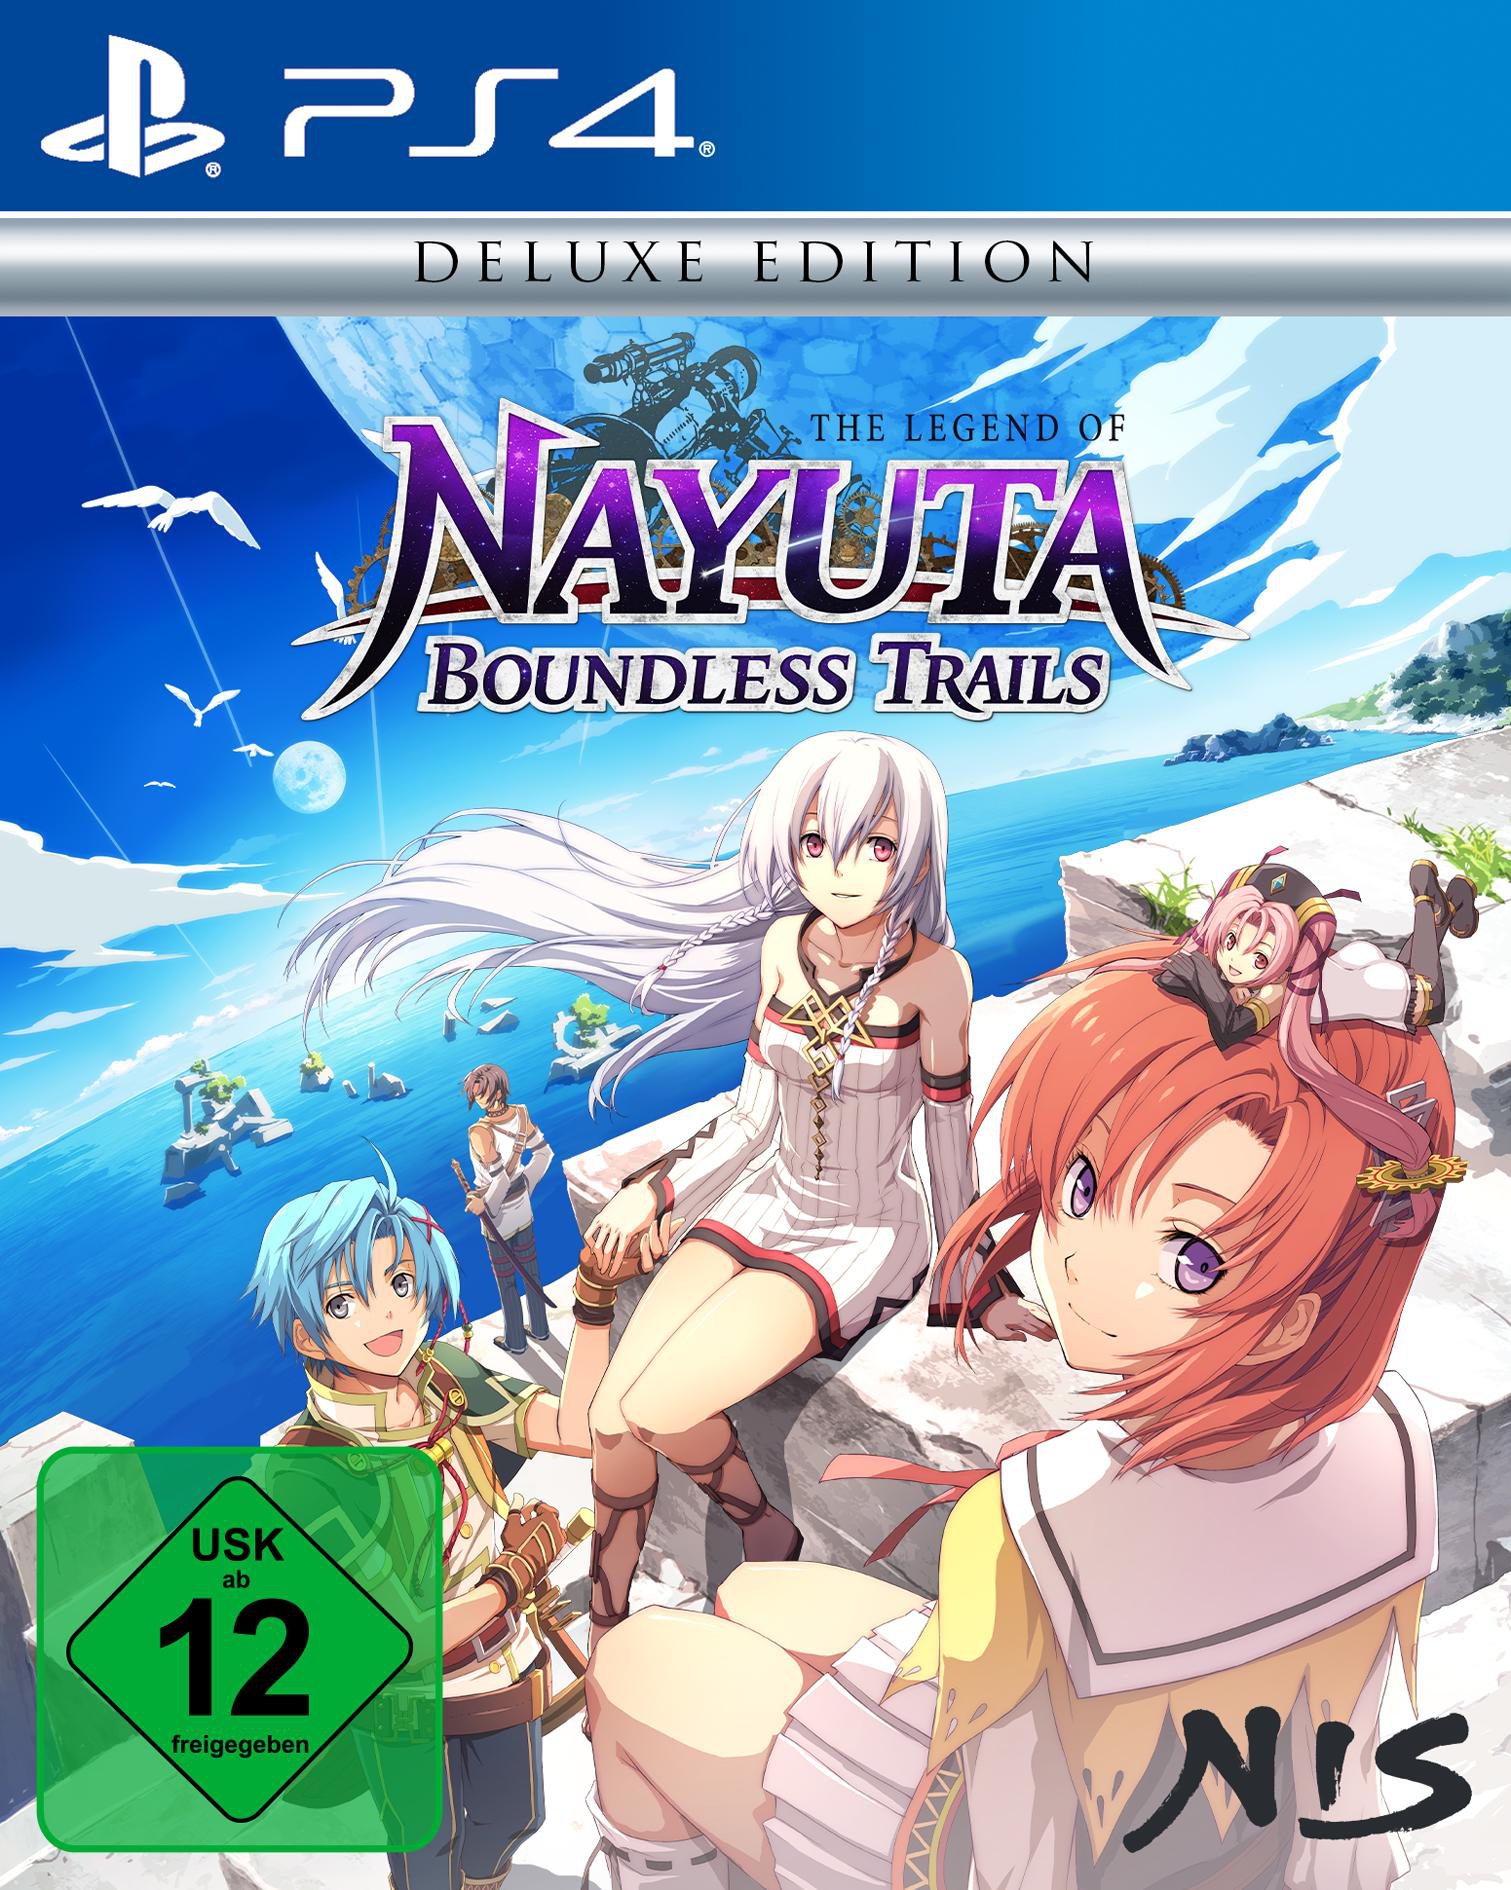 PS4 THE LEGEND BOUNDLESS [PlayStation NAYUTA: TRAILS 4] - OF